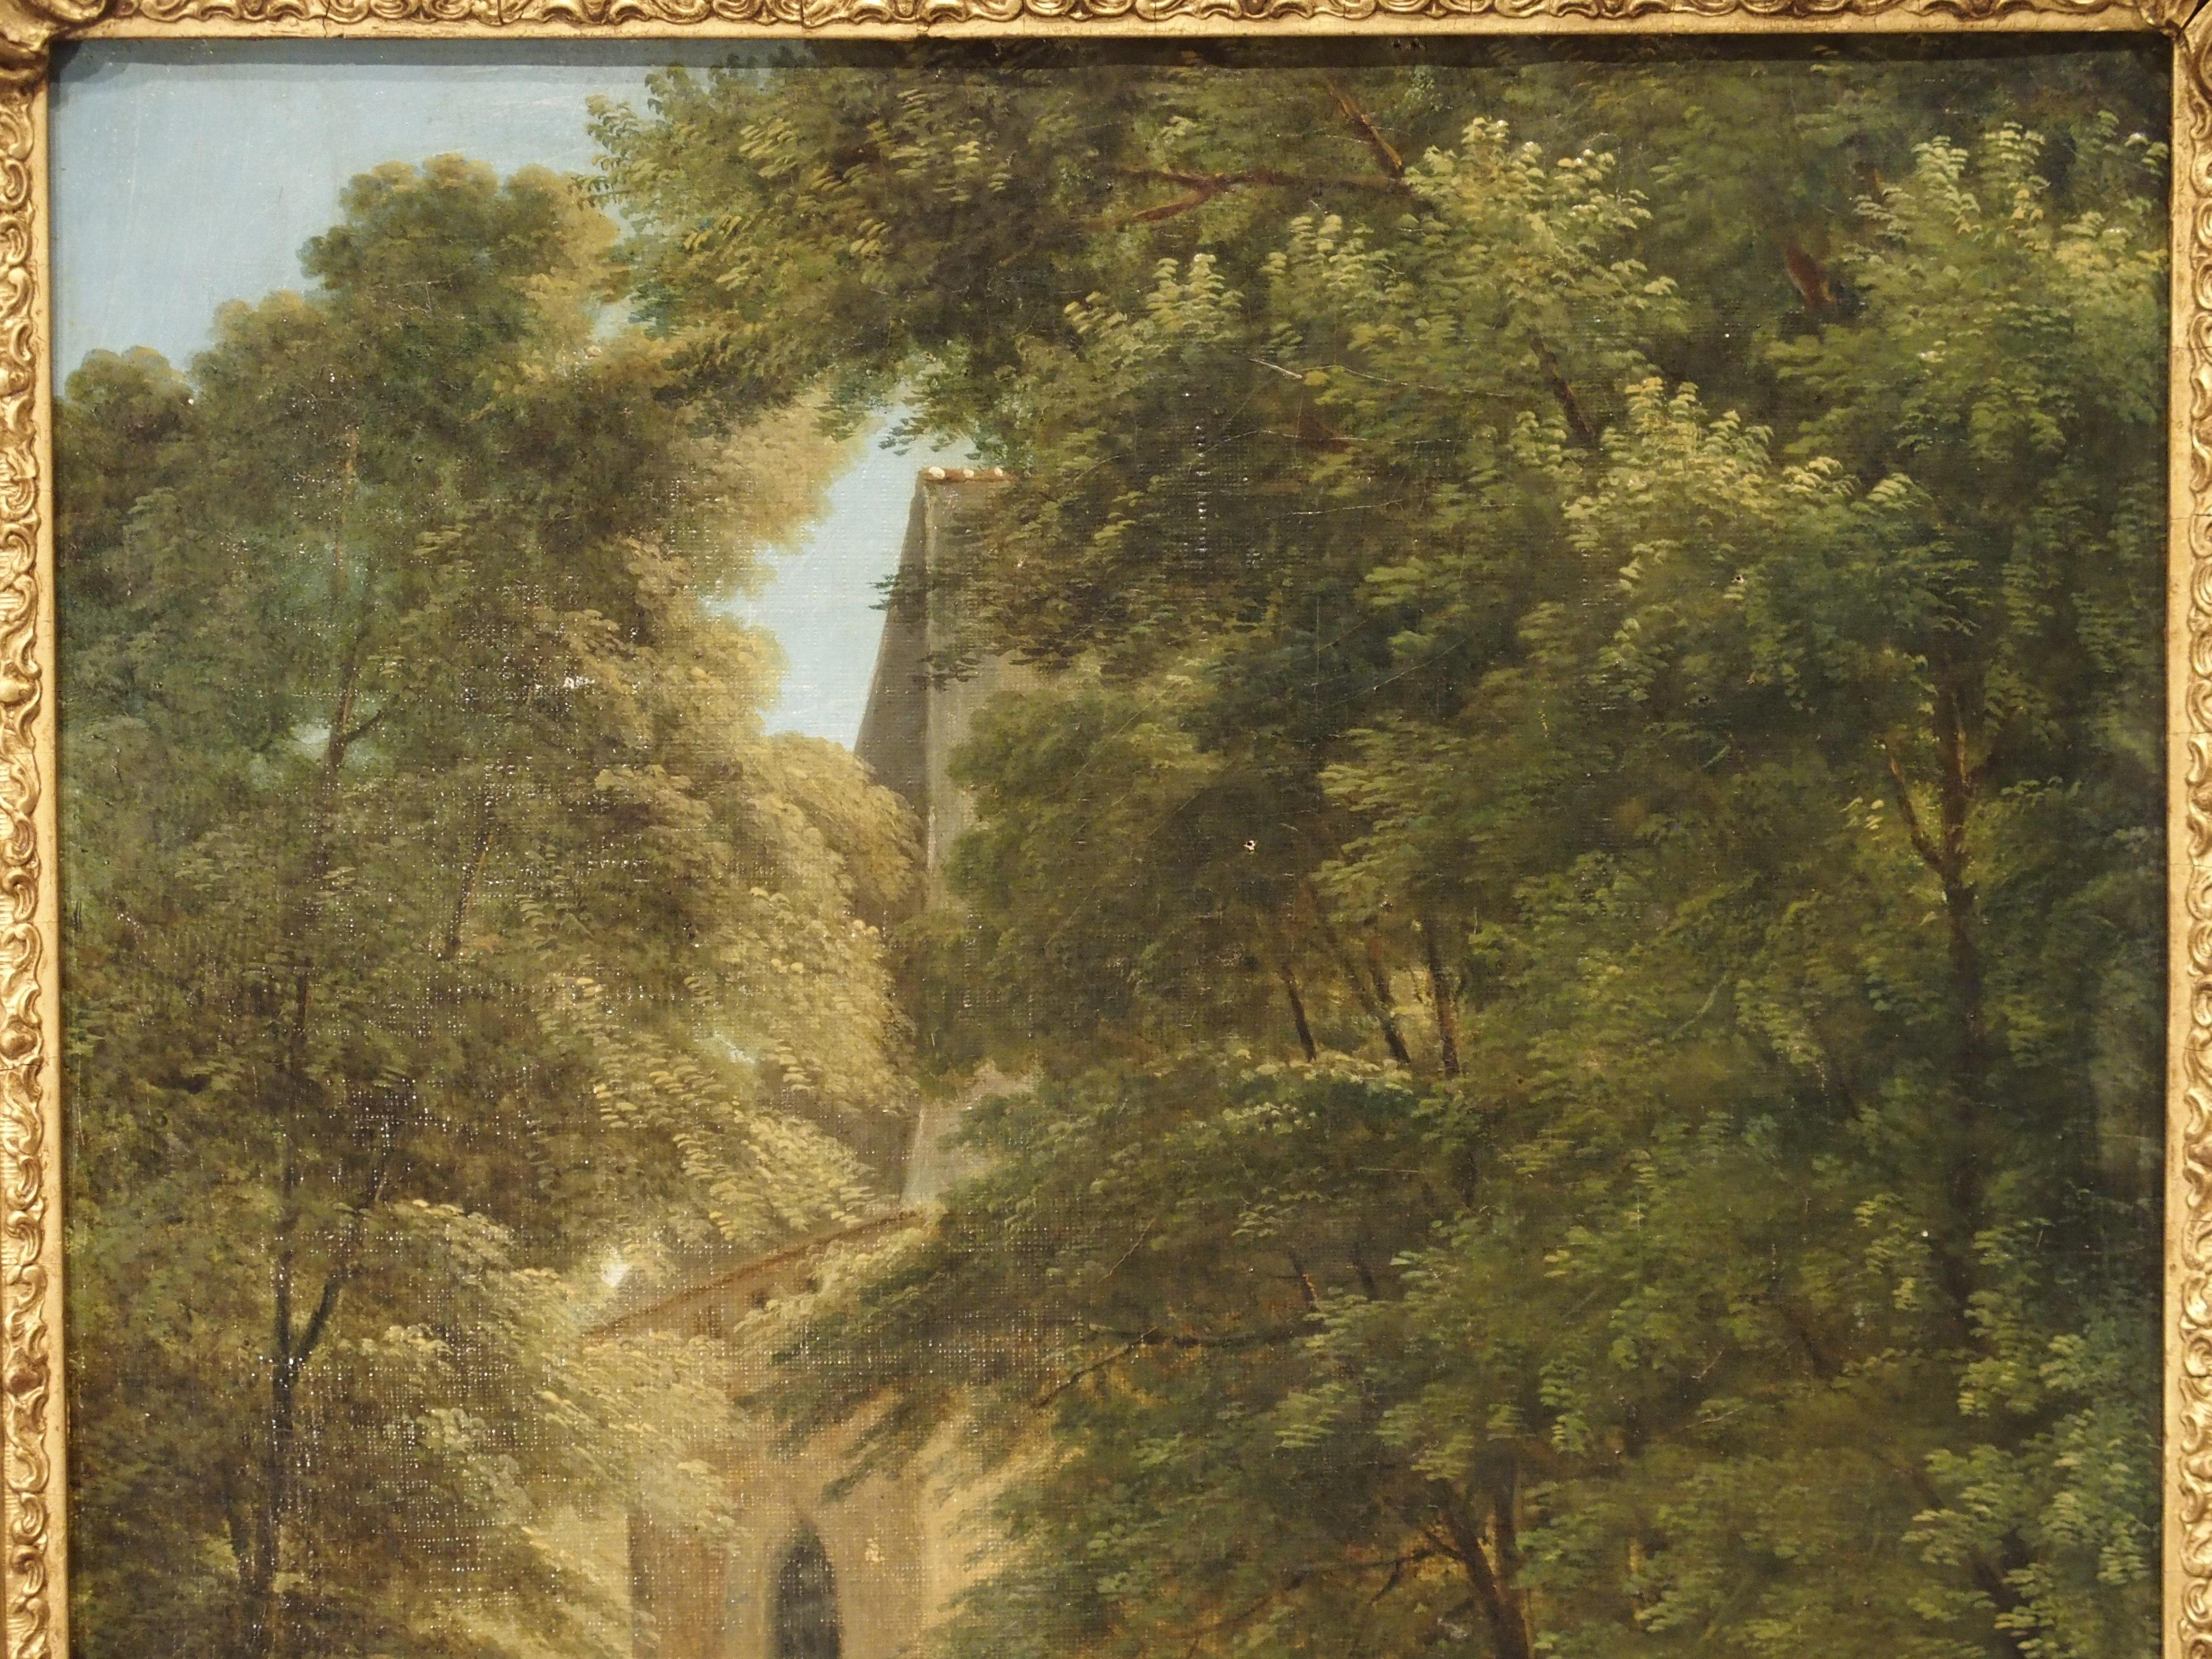 Hand-Painted Small 19th Century French Oil Painting Depicting a Stone Chapel in a Forest